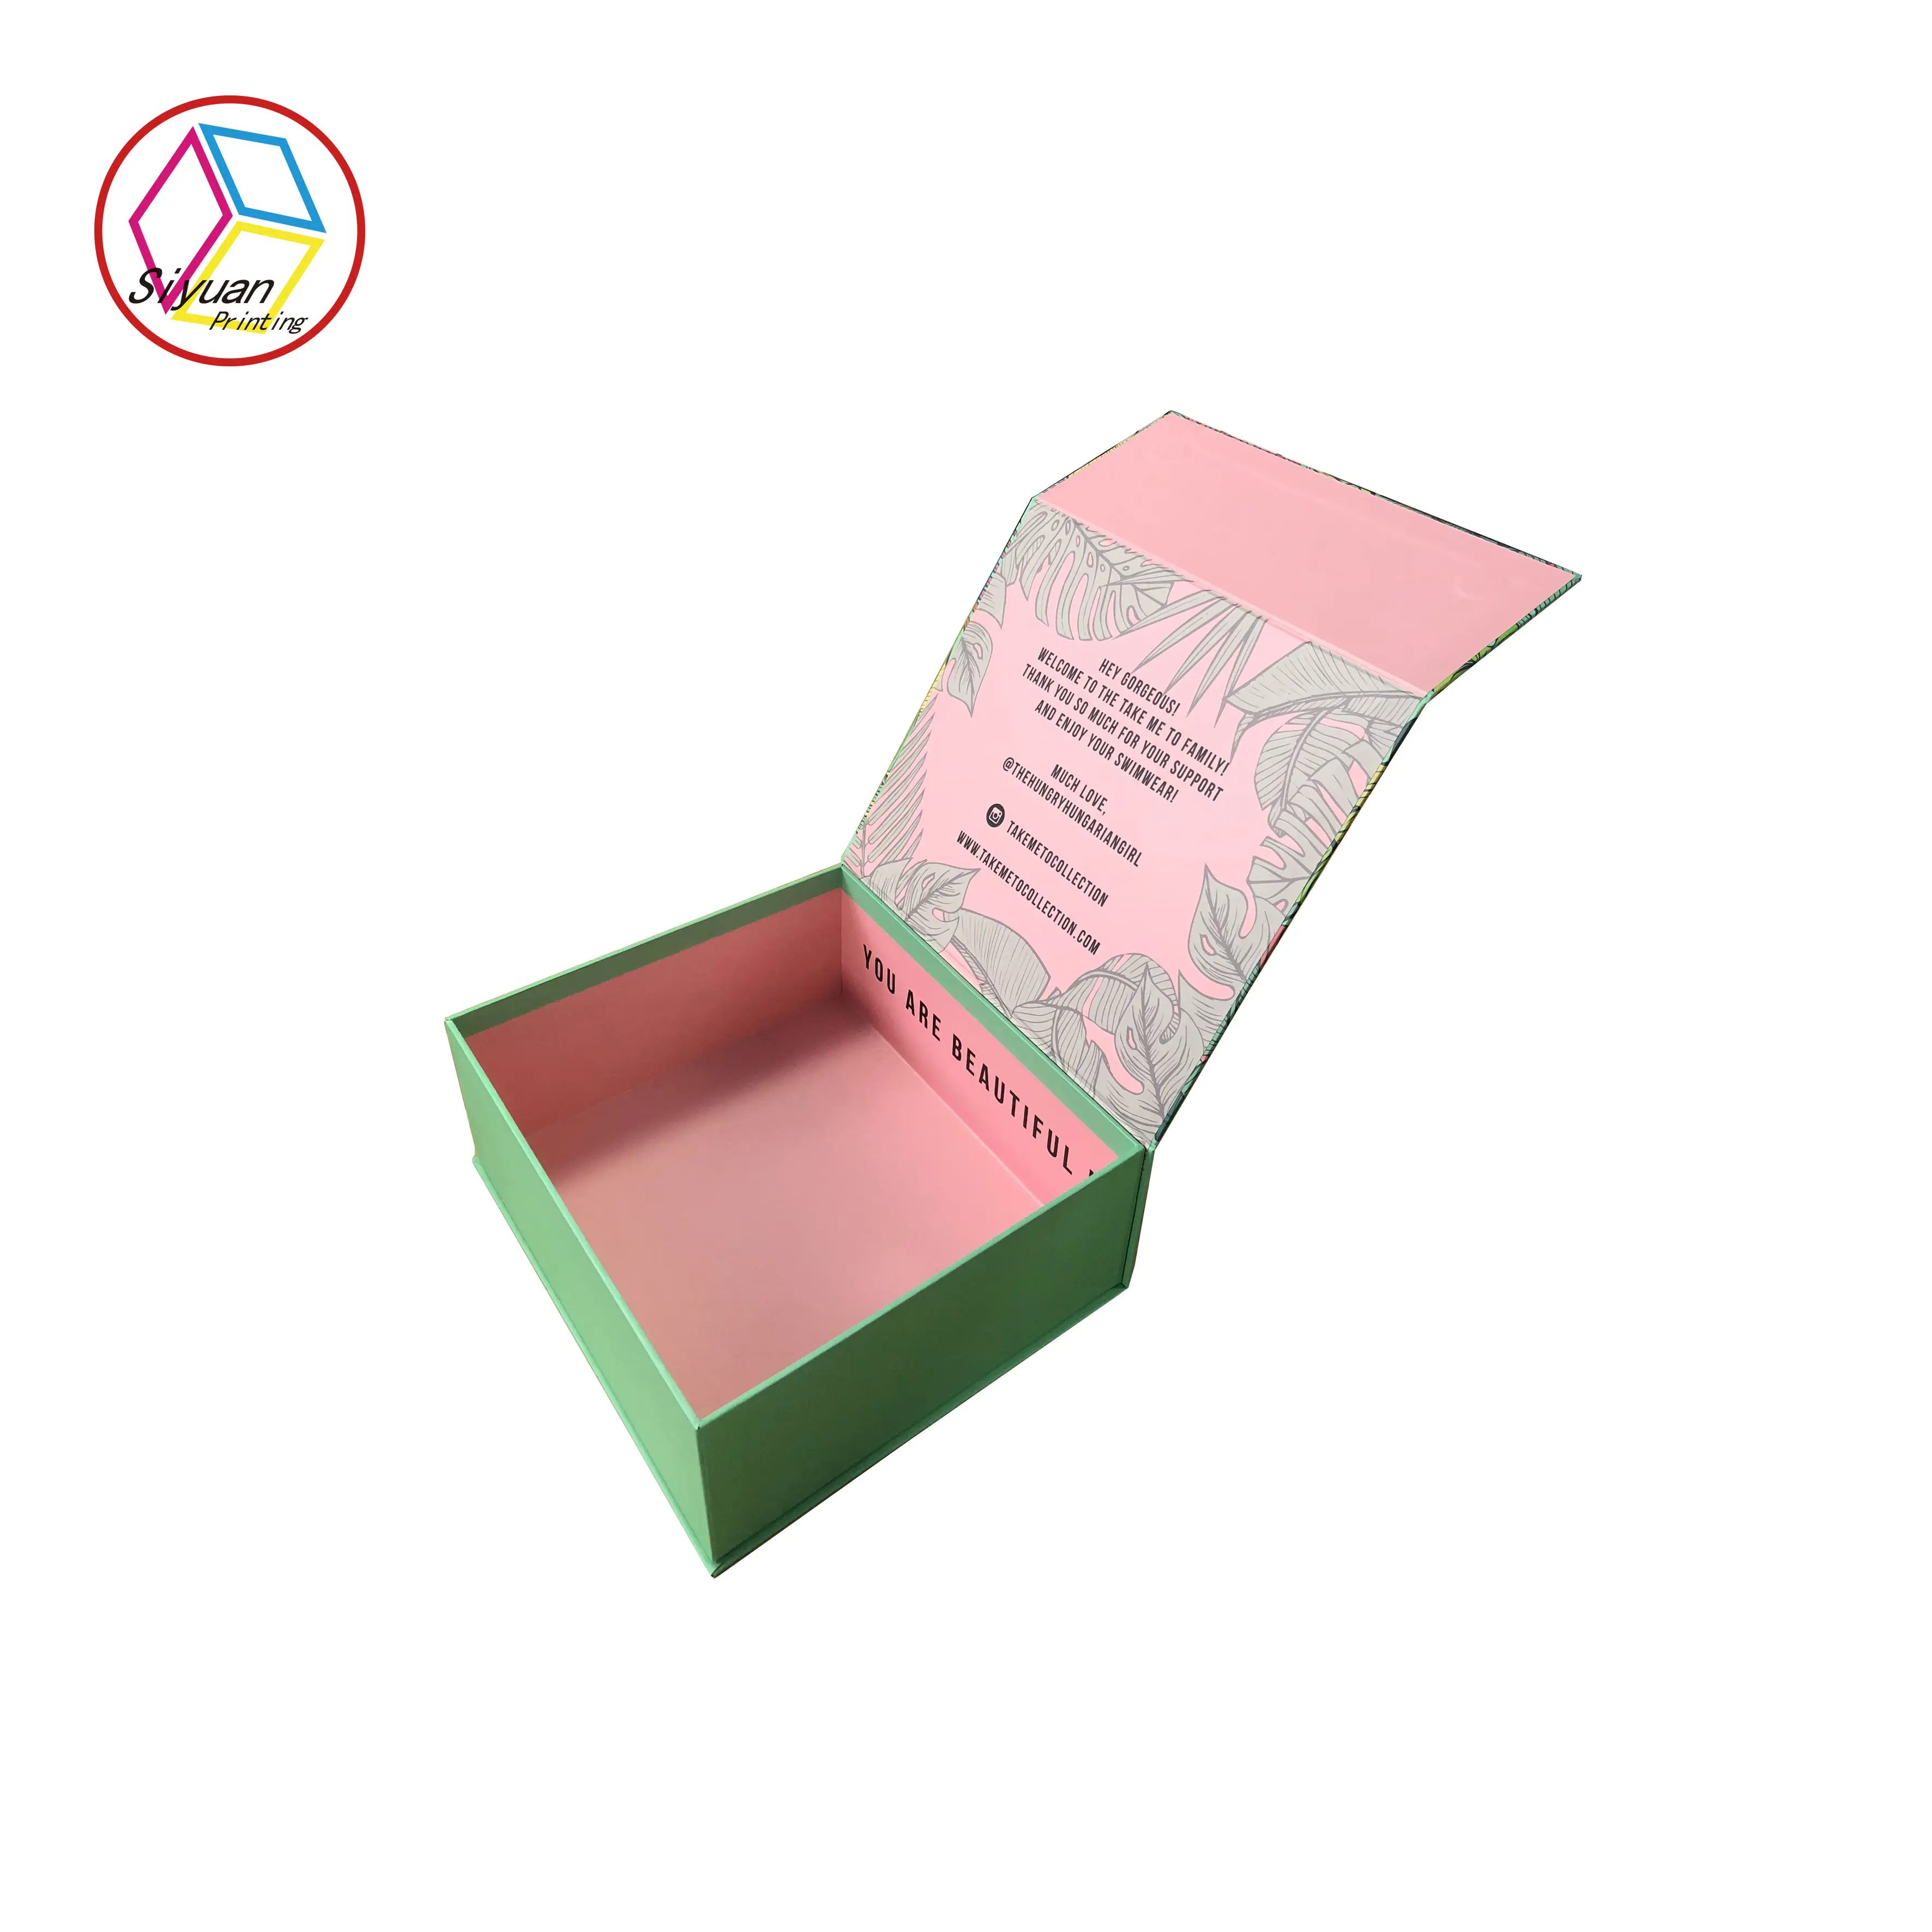 Designs cardboard drawer foldable packaging kid toy paper storage box gift for gift packaging